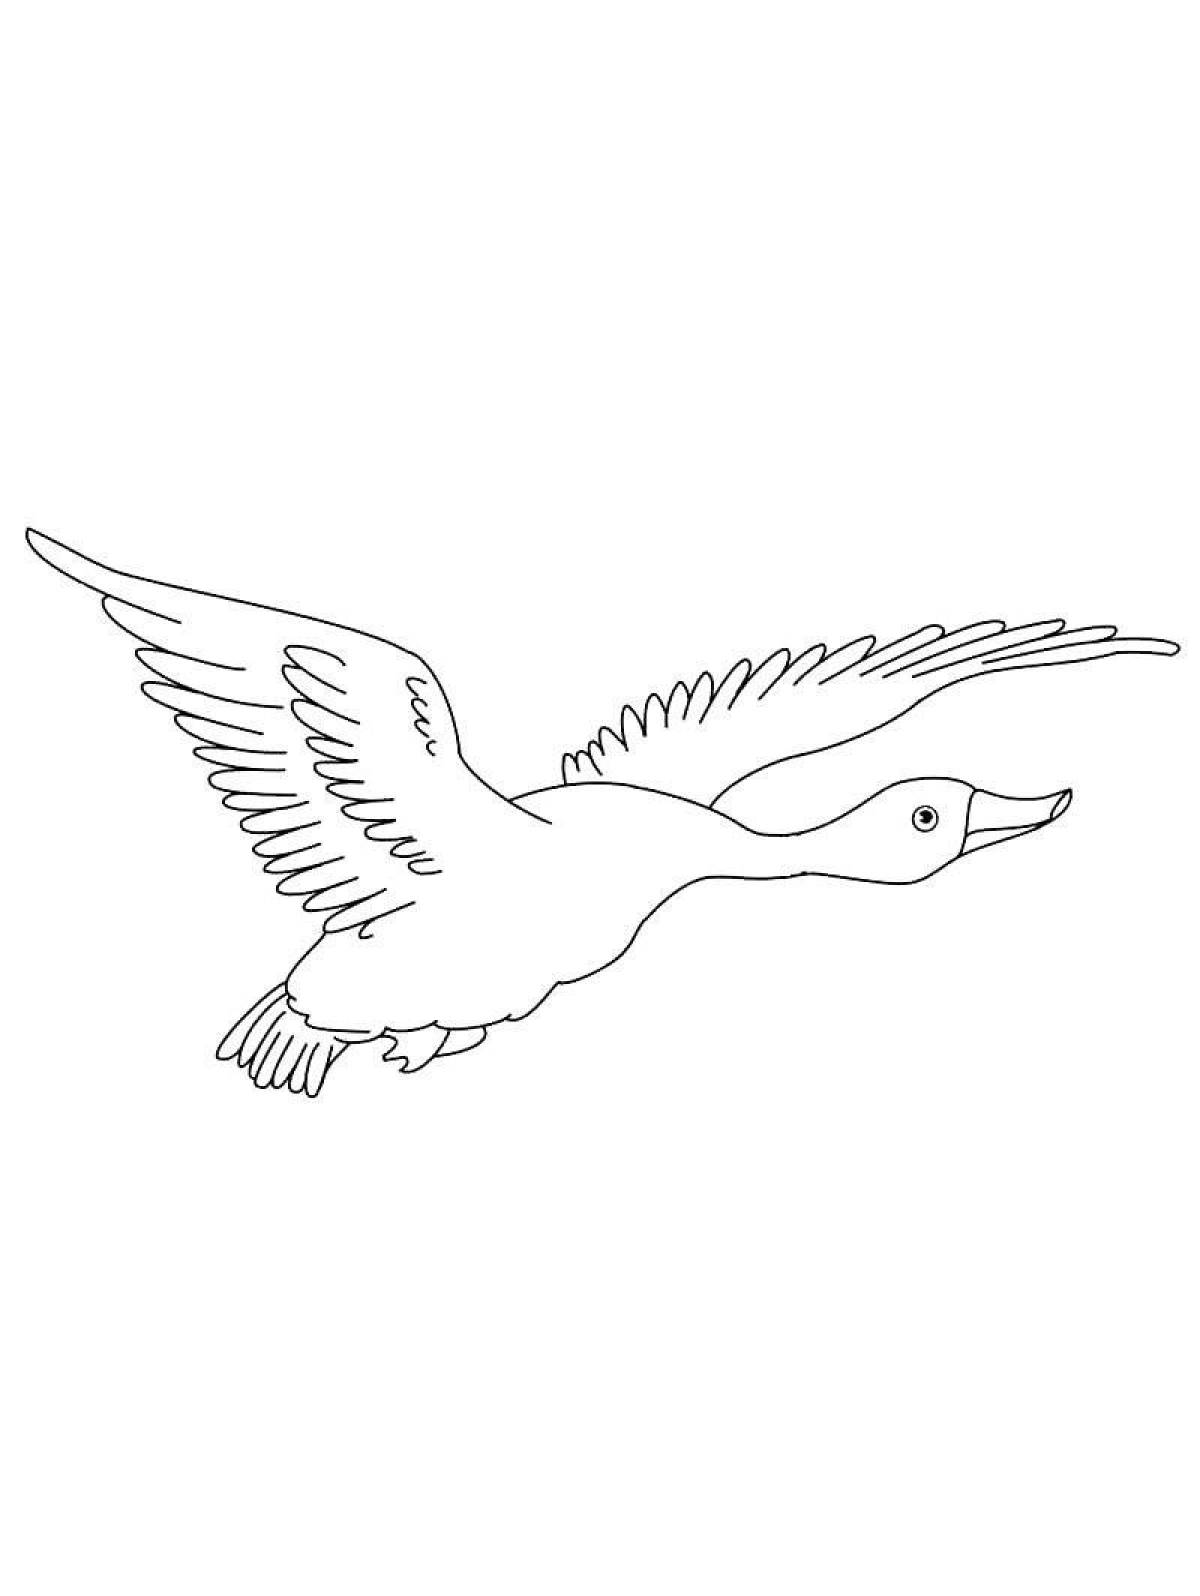 Swan geese coloring page